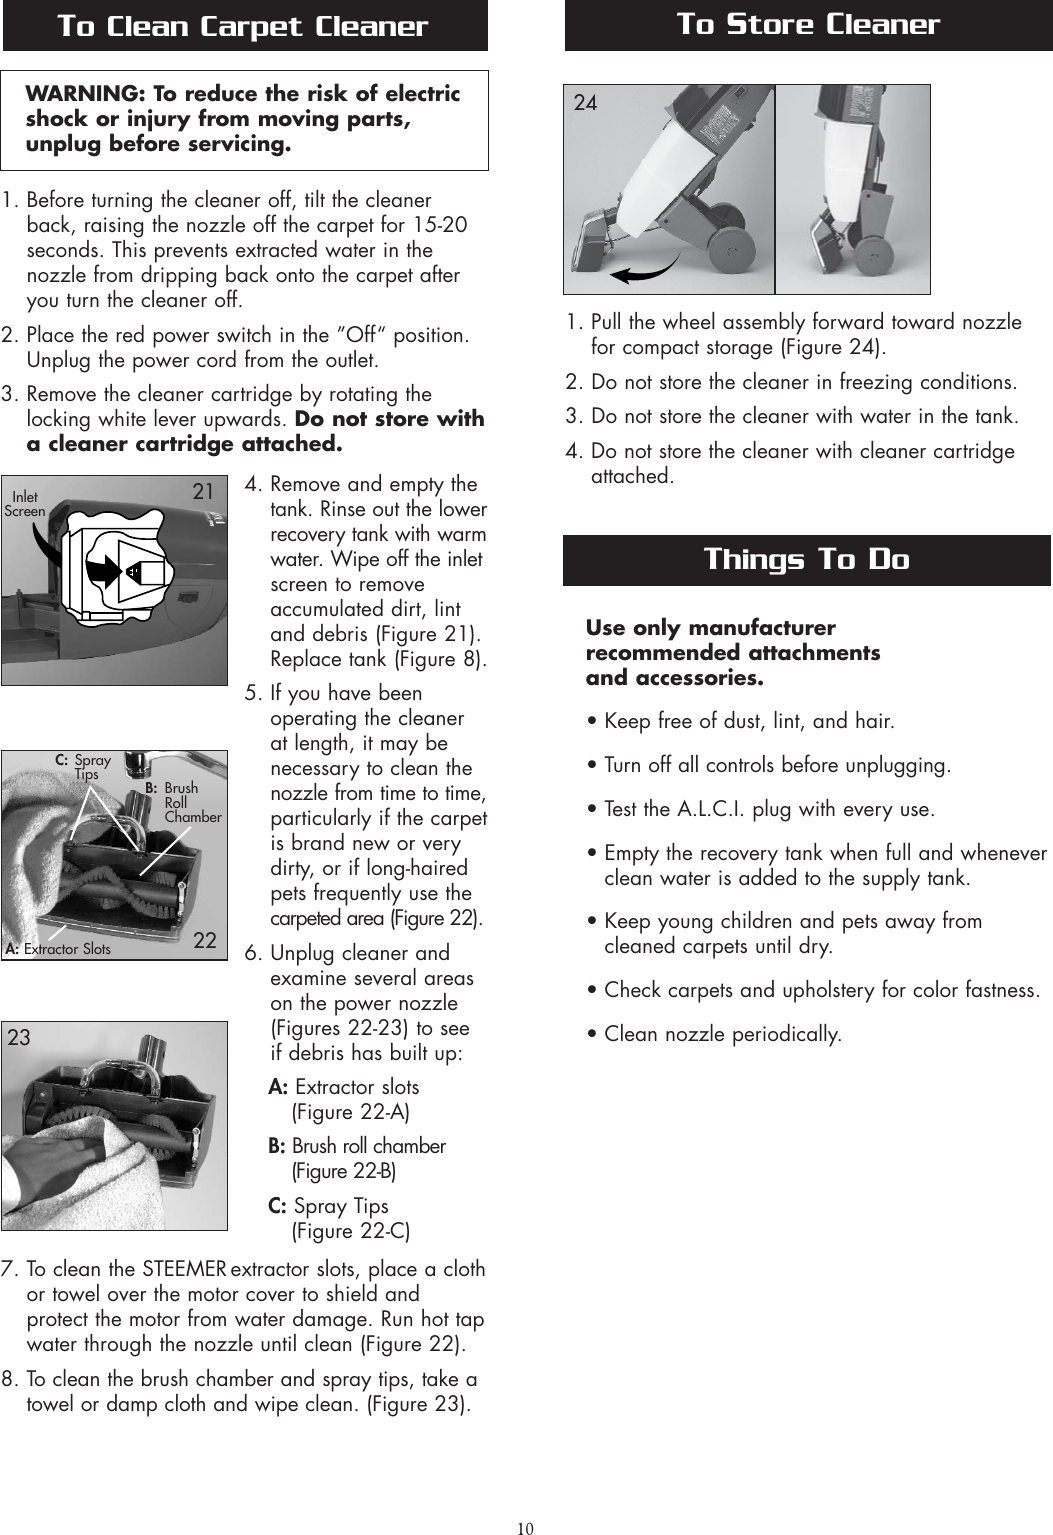 Page 10 of 11 - Oreck Oreck-Xls465-Users-Manual- 53094-03 Rev E Steemer  Oreck-xls465-users-manual